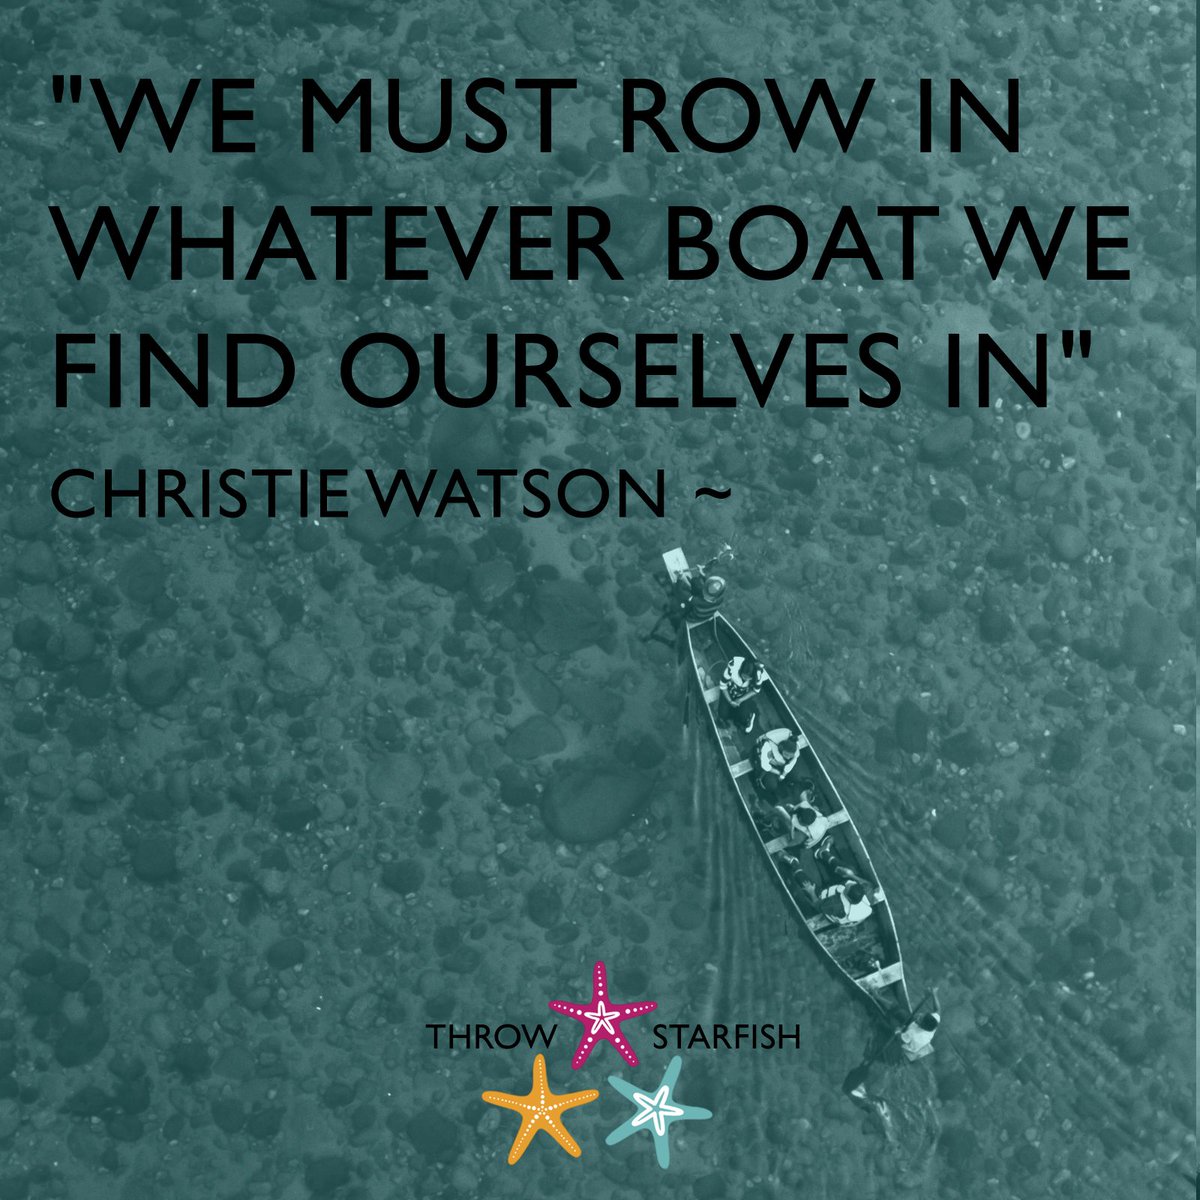 'WE MUST ROW IN WHATEVER BOAT WE FIND OURSELVES IN' ~ #ChristieWatson
#ThrowStarfish #Podcast #Episodes on our profile #Quote